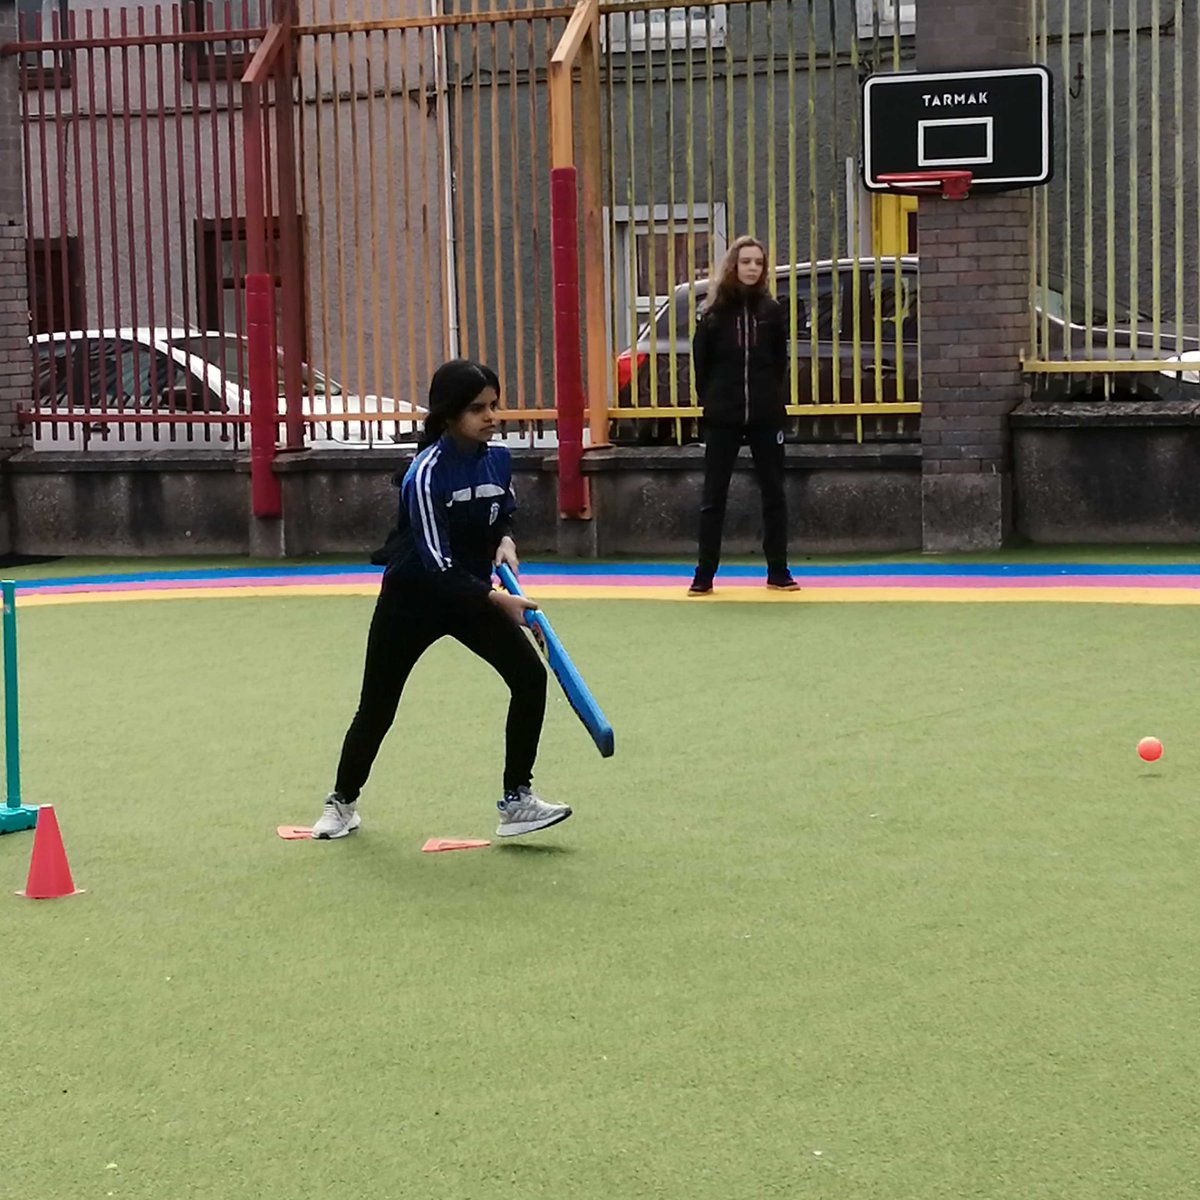 All the students are having great fun at their cricket coaching sessions! A big thanks to @Cork_CountyCC #cricketforall
🏏😊